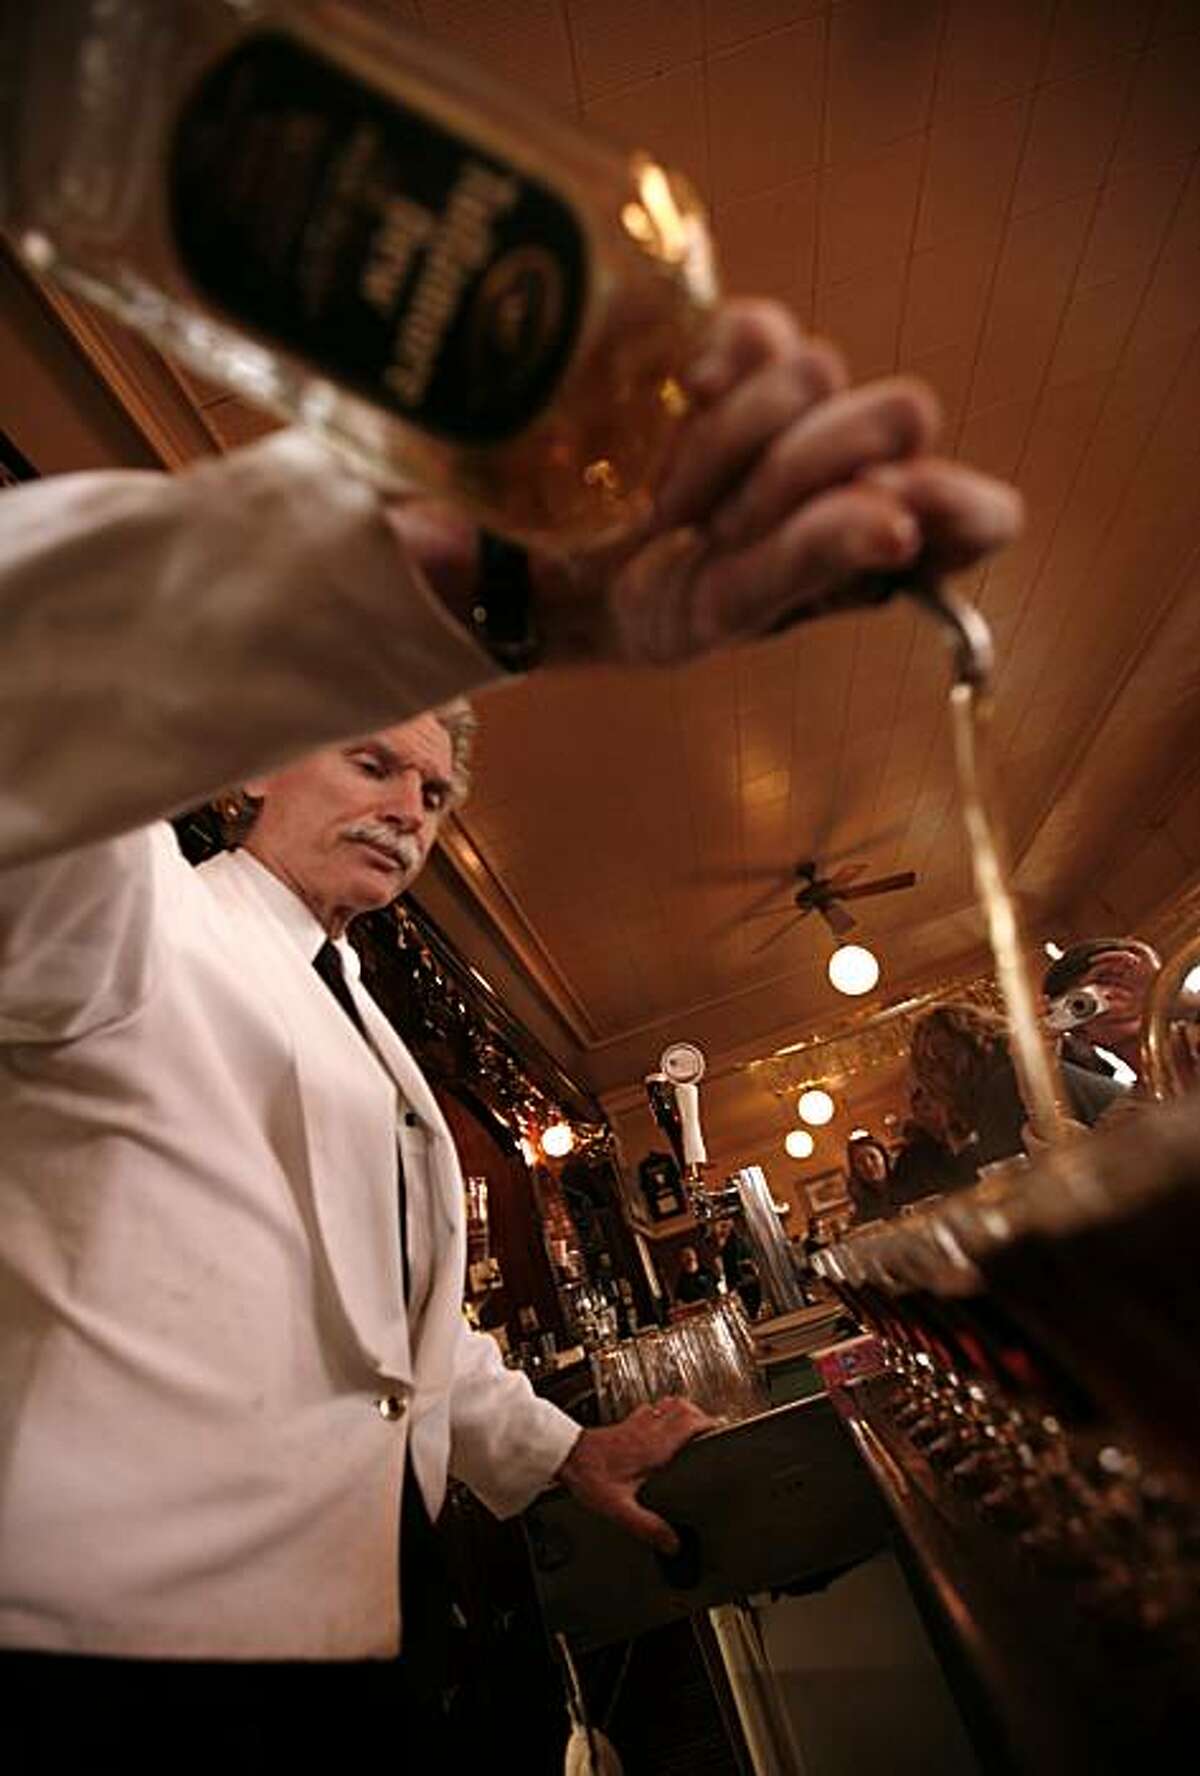 Bartender Larry Nolan says the number of Irish coffees he's poured in his 35 years is in the millions. He sets up ten more as the Buena Vista Cafe kicks off a three-day celebration in honor of the 56th anniversary of the introduction of the Irish coffee on Saturday, Nov. 8, 2008 in San Francisco, Calif.